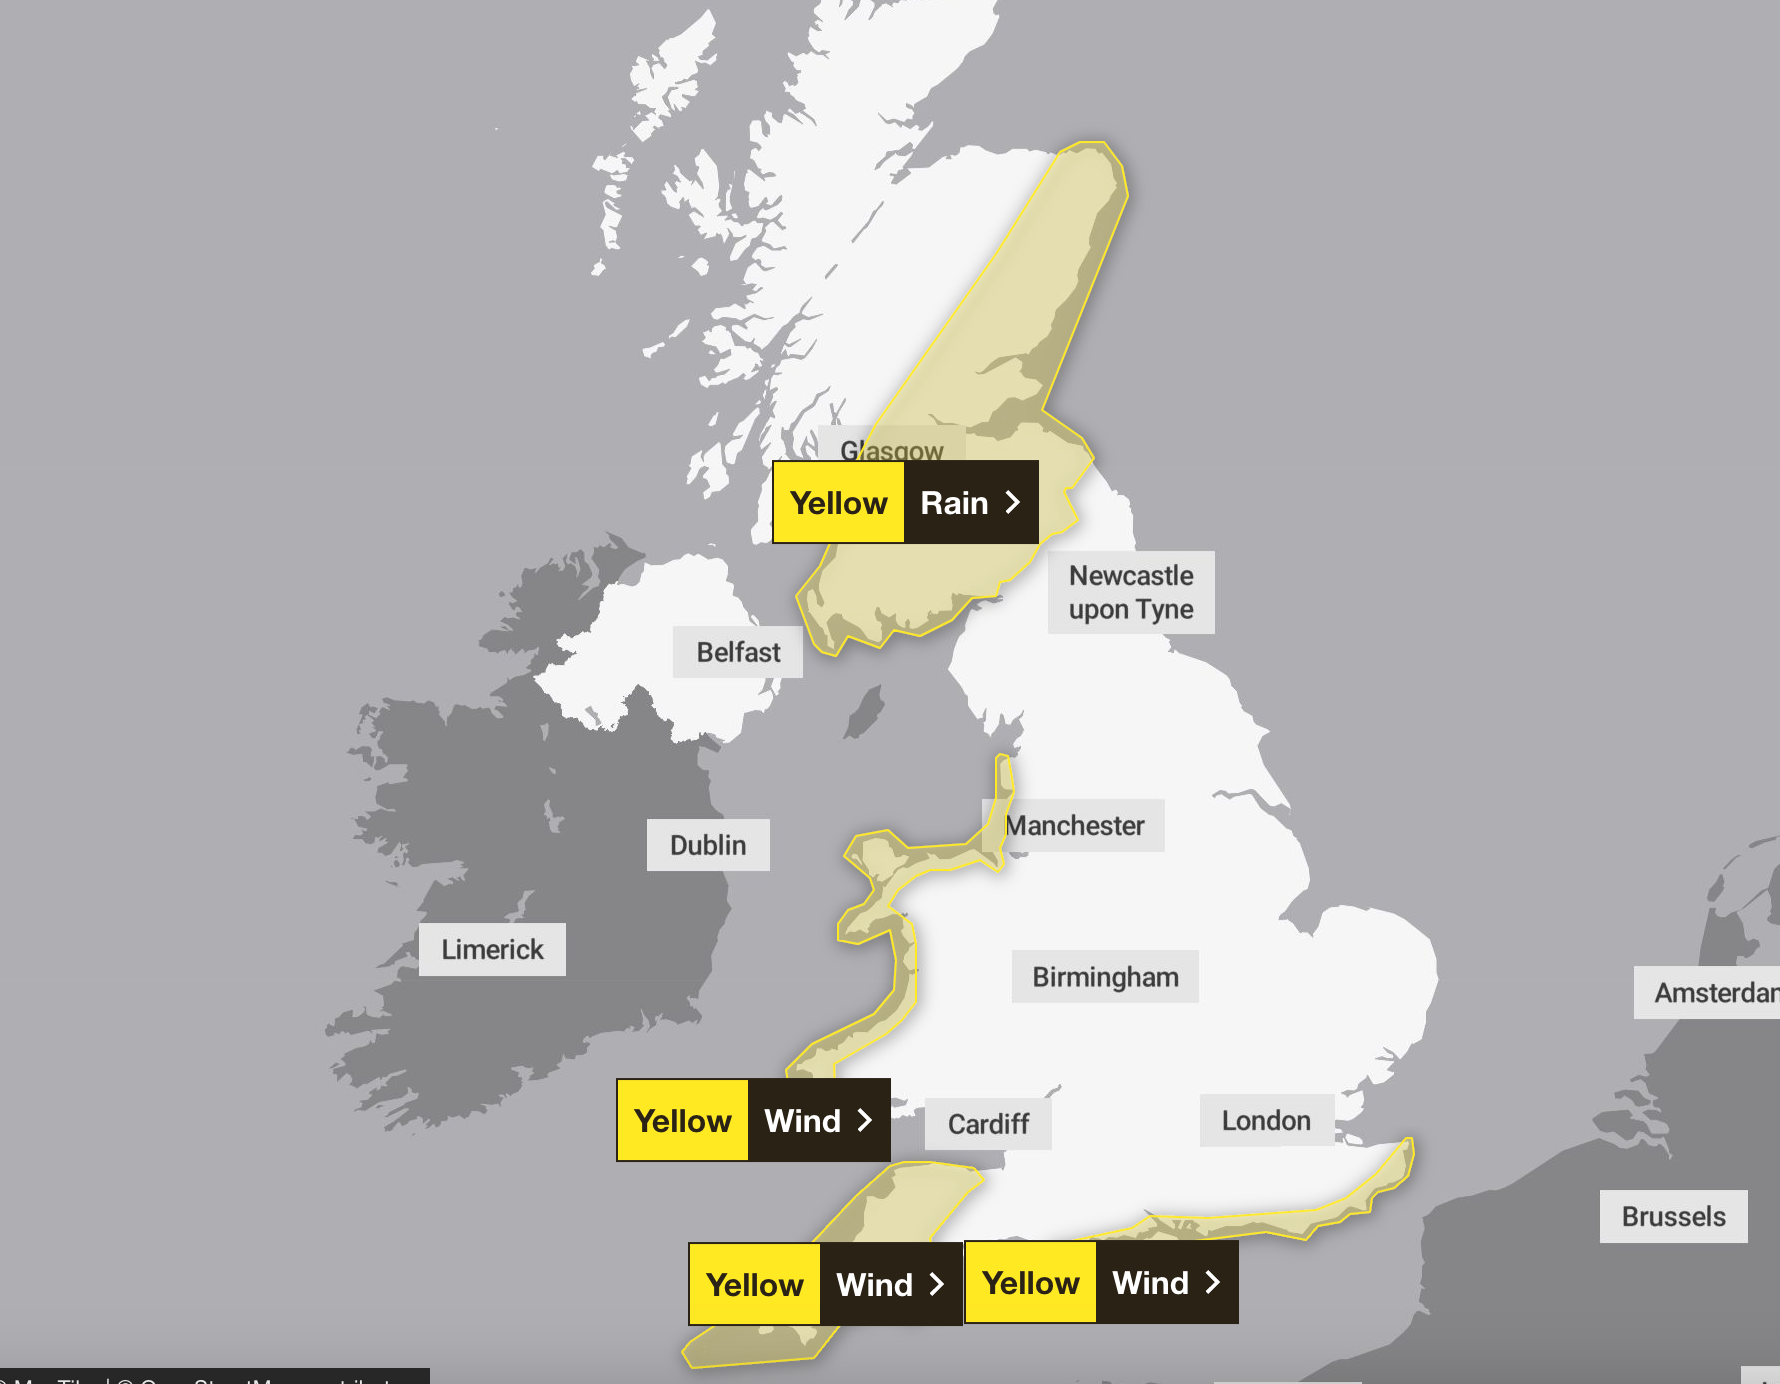 The forecaster warned of a danger to life across parts of the UK this week